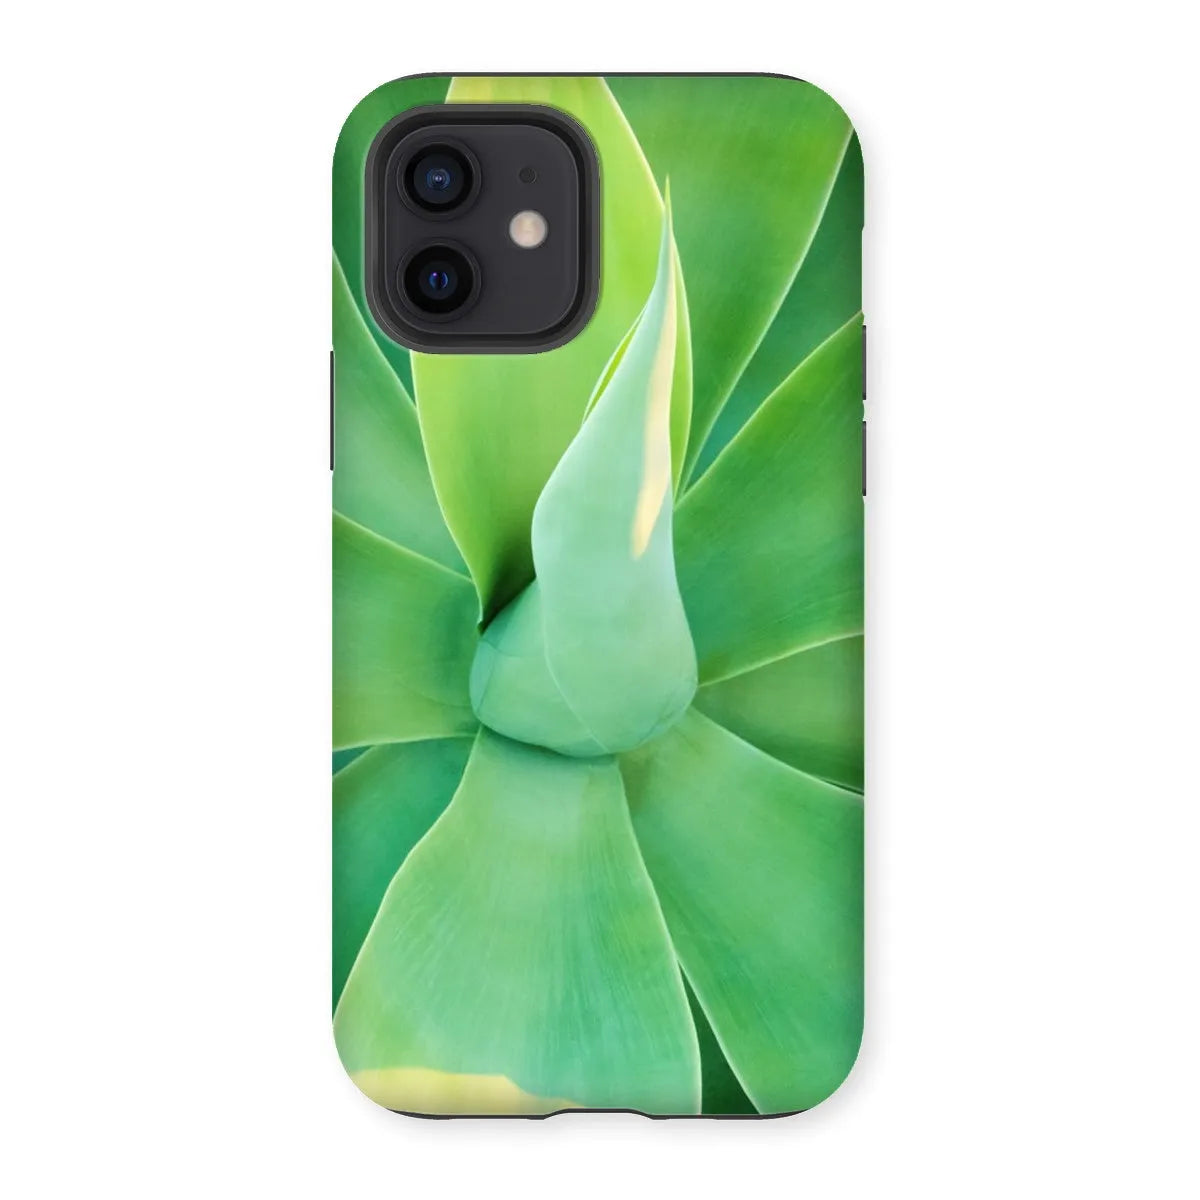 In Bloom Too Tough Phone Case - Iphone 12 / Matte - Mobile Phone Cases - Aesthetic Art